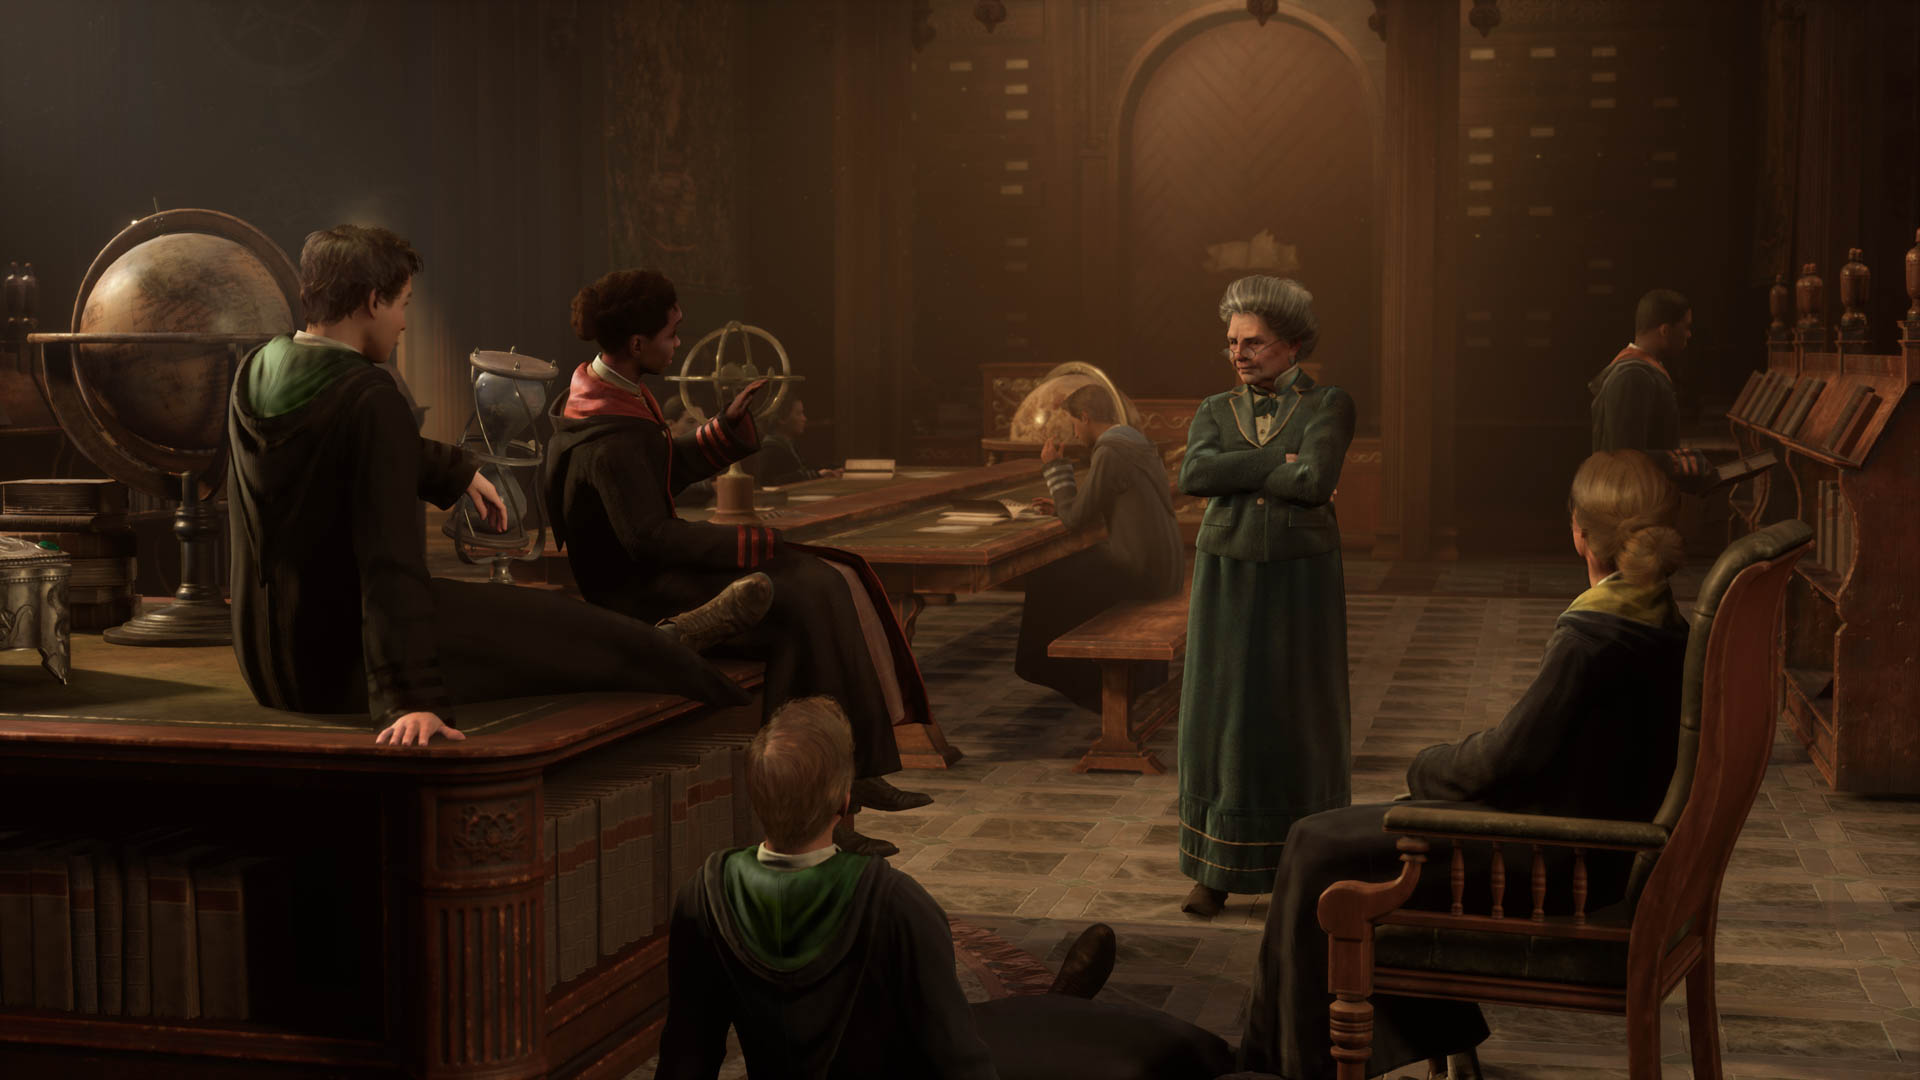 Hogwarts students from various houses speaking with a professor in the school